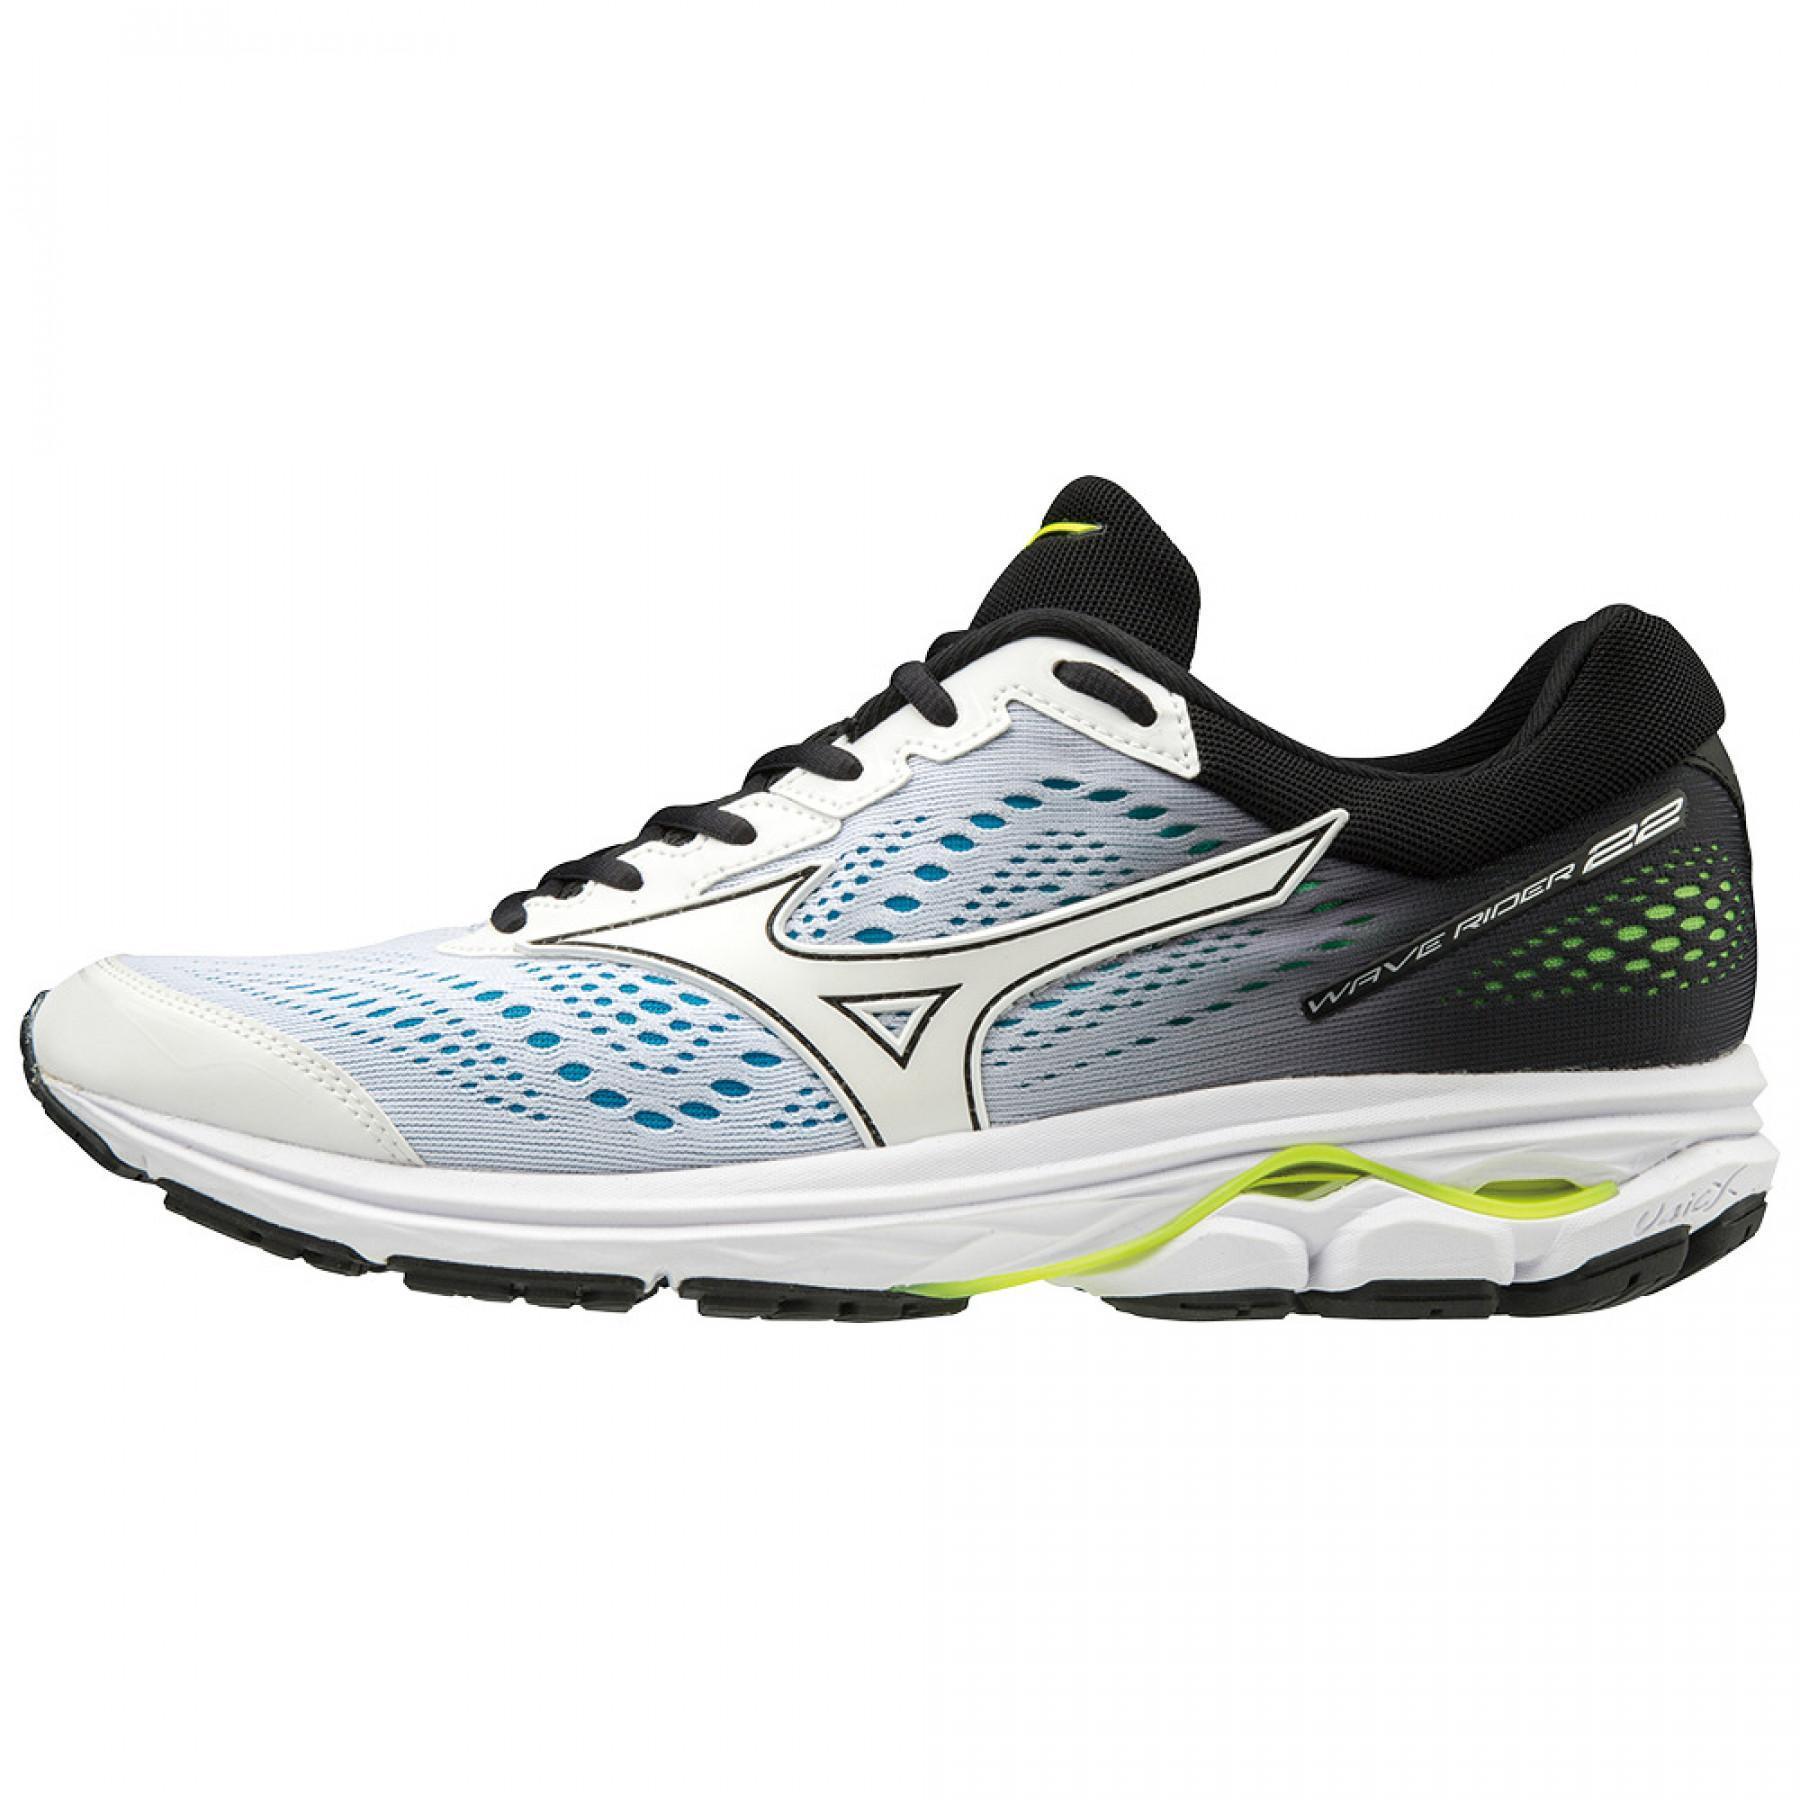 Chaussures Mizuno Wave rider 22 colorful